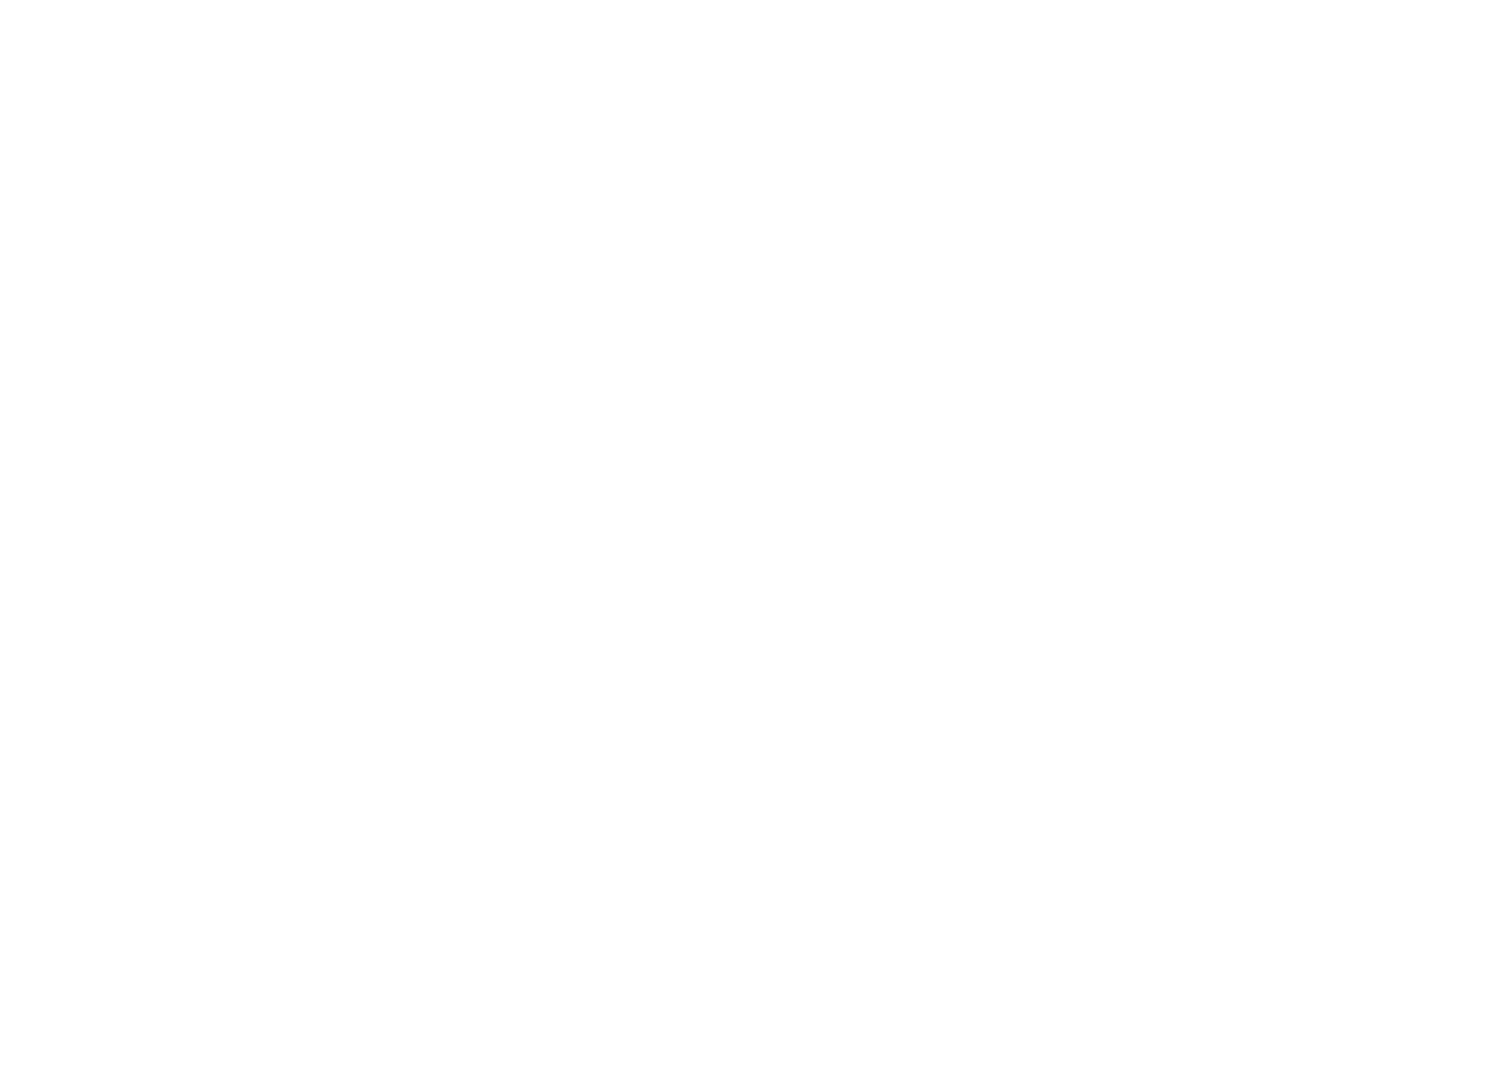 Qboat wireframe